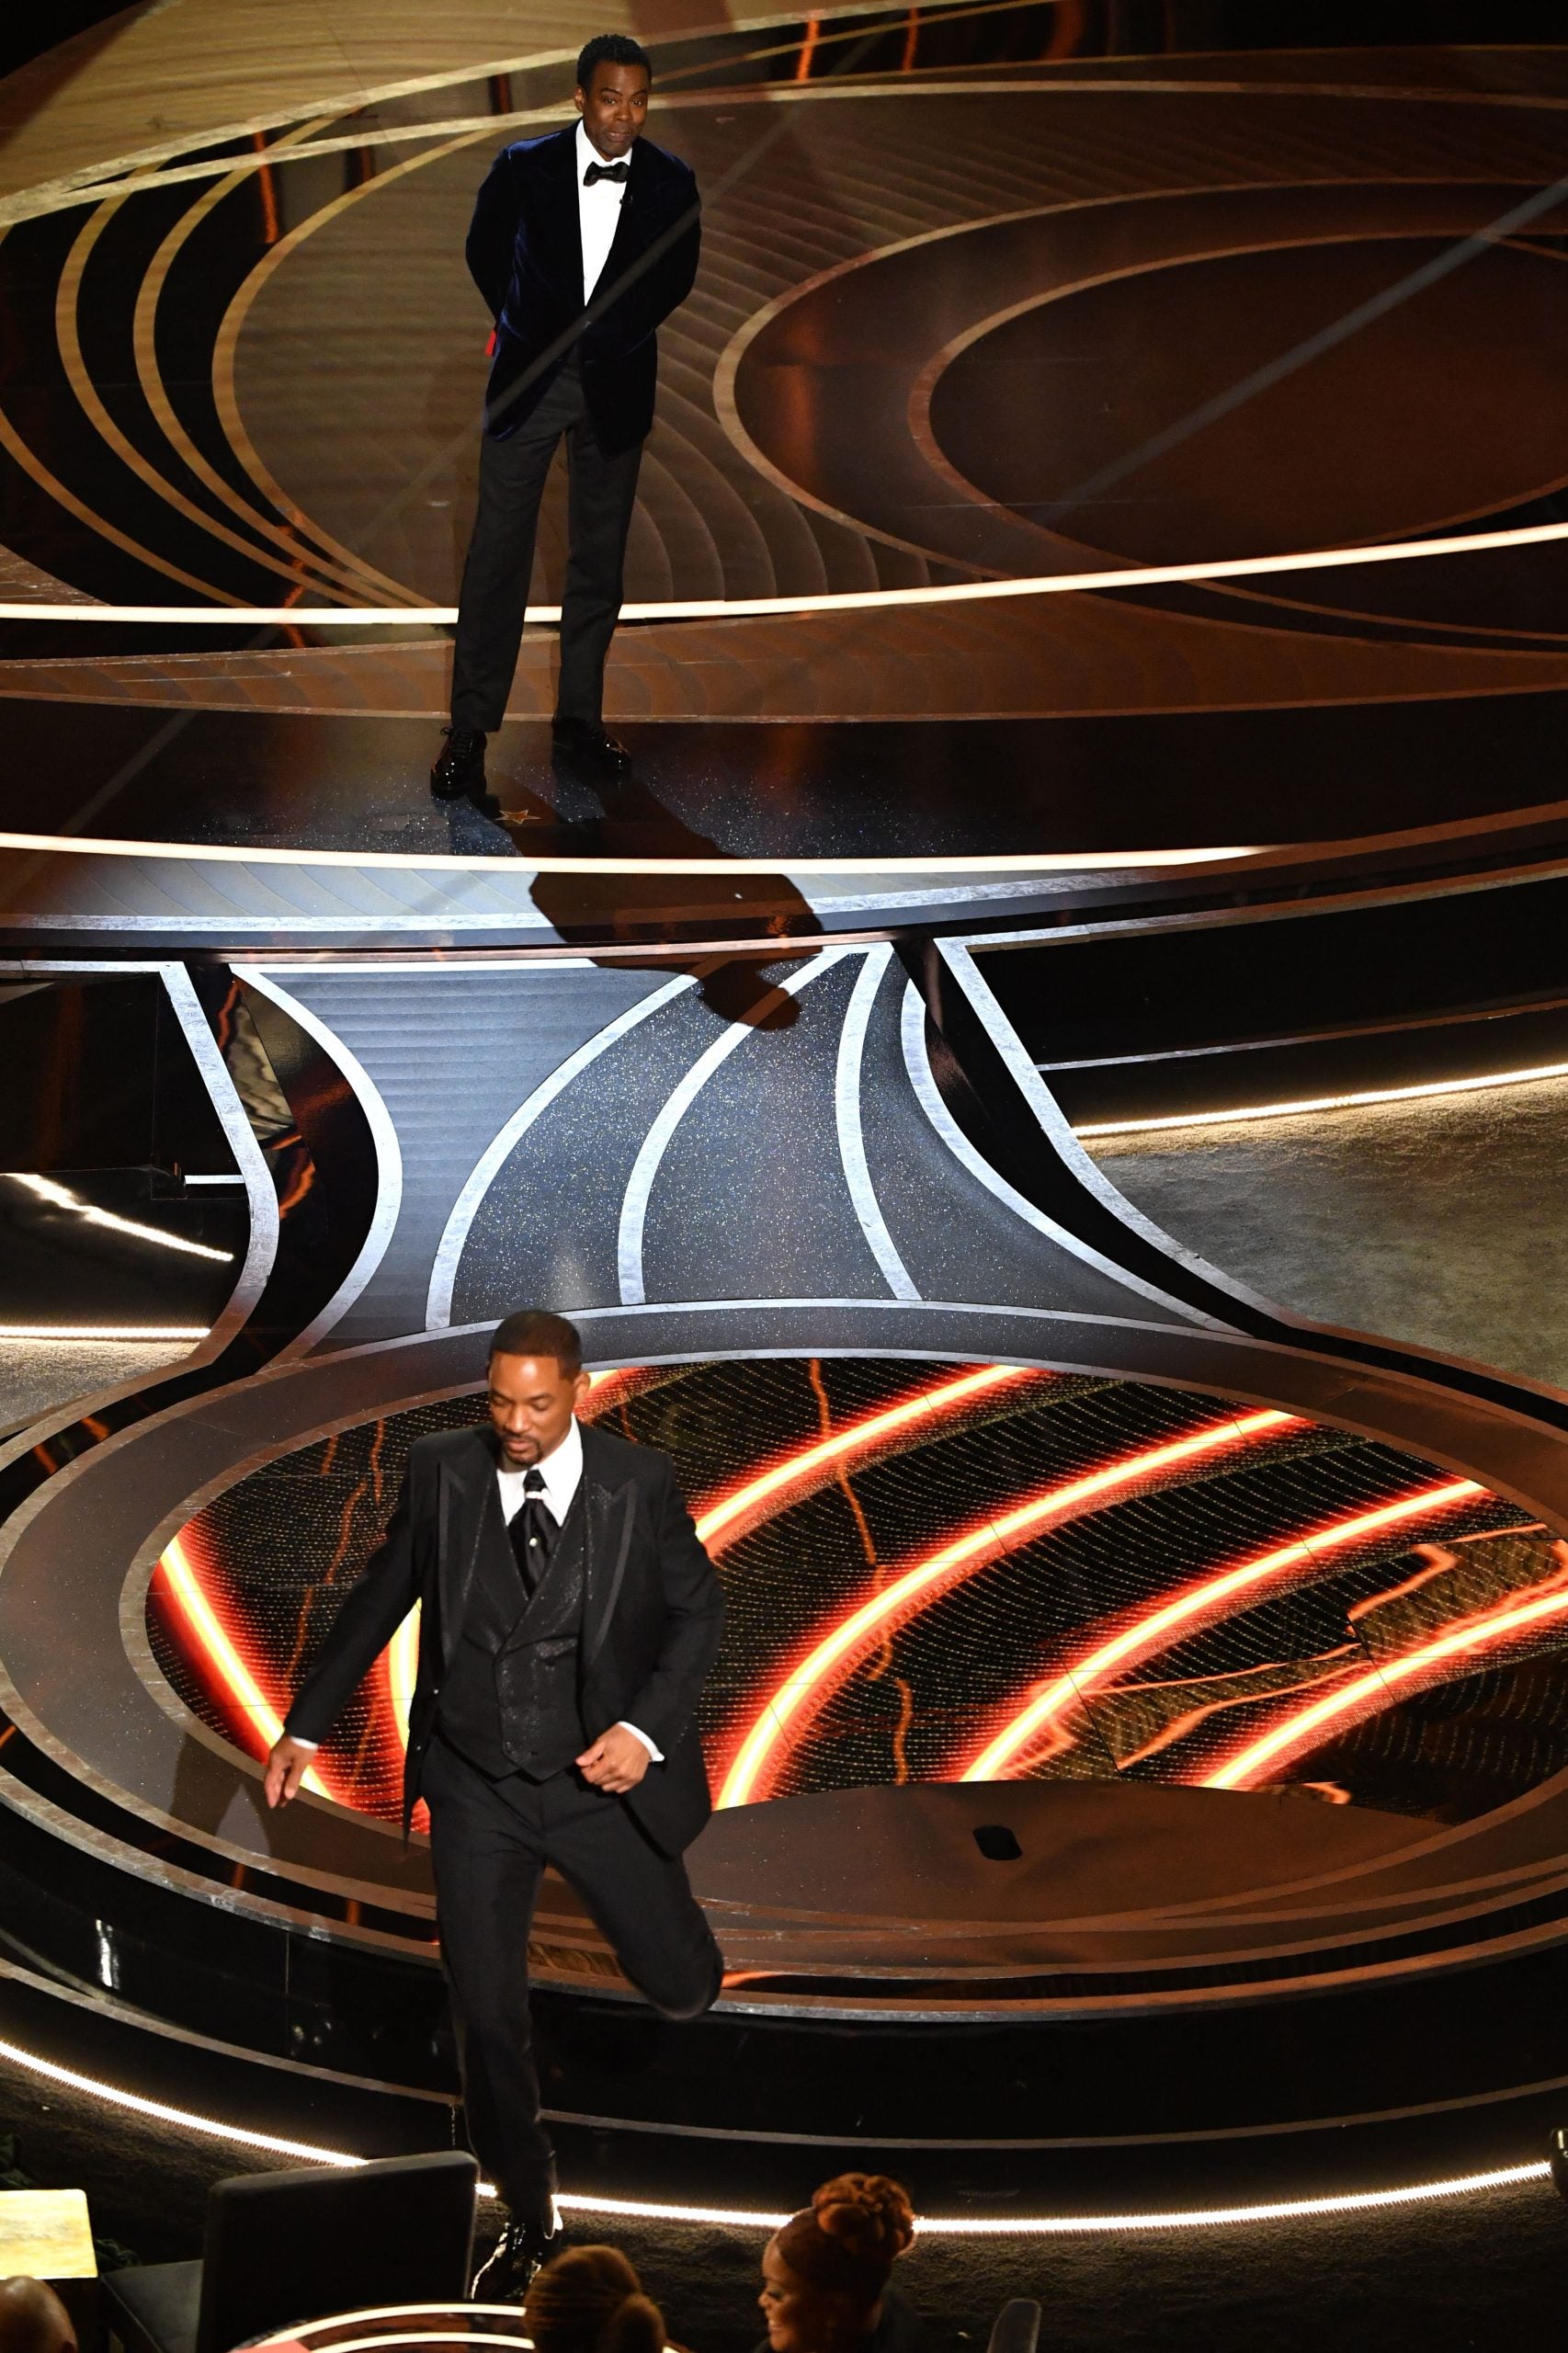 Will Smith Issues A Public Apology For Tense Oscars Encounter With Chris Rock